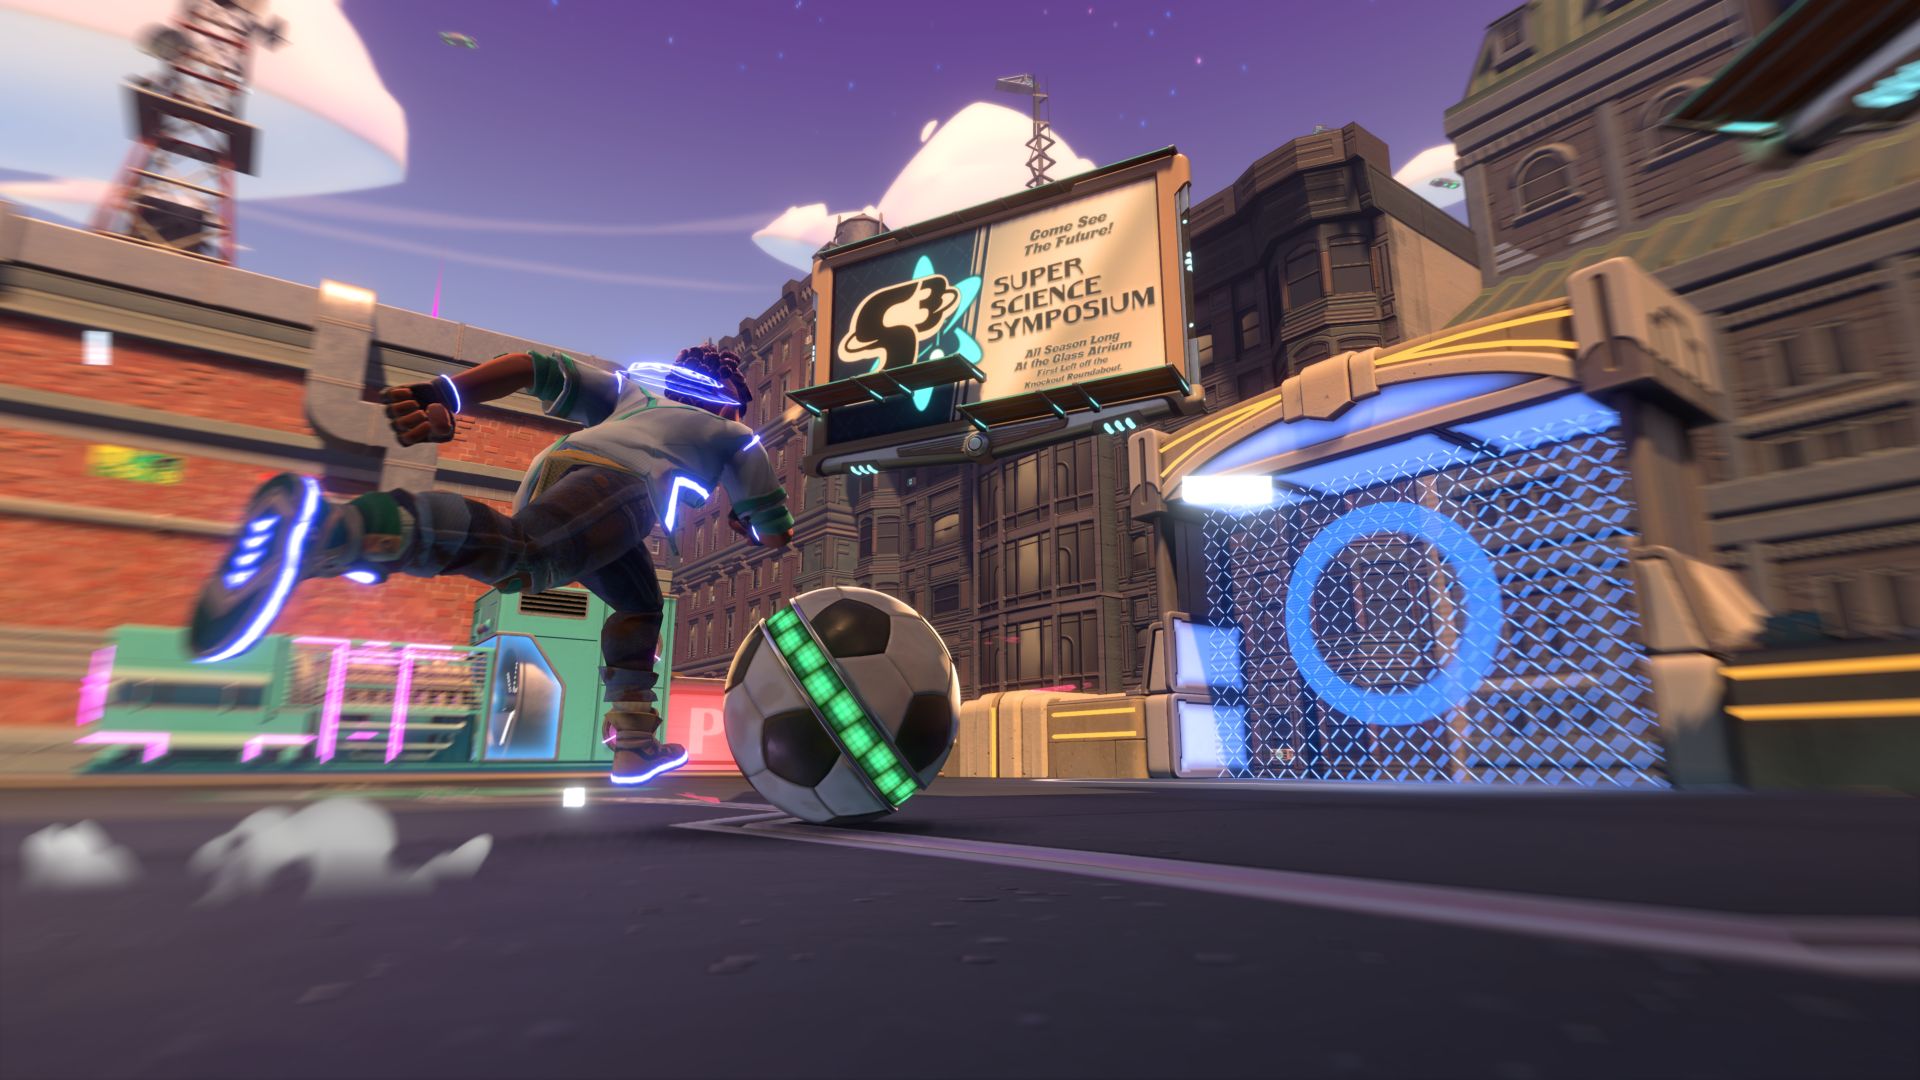 Knockout City goes free-to-play with the launch of Season 6